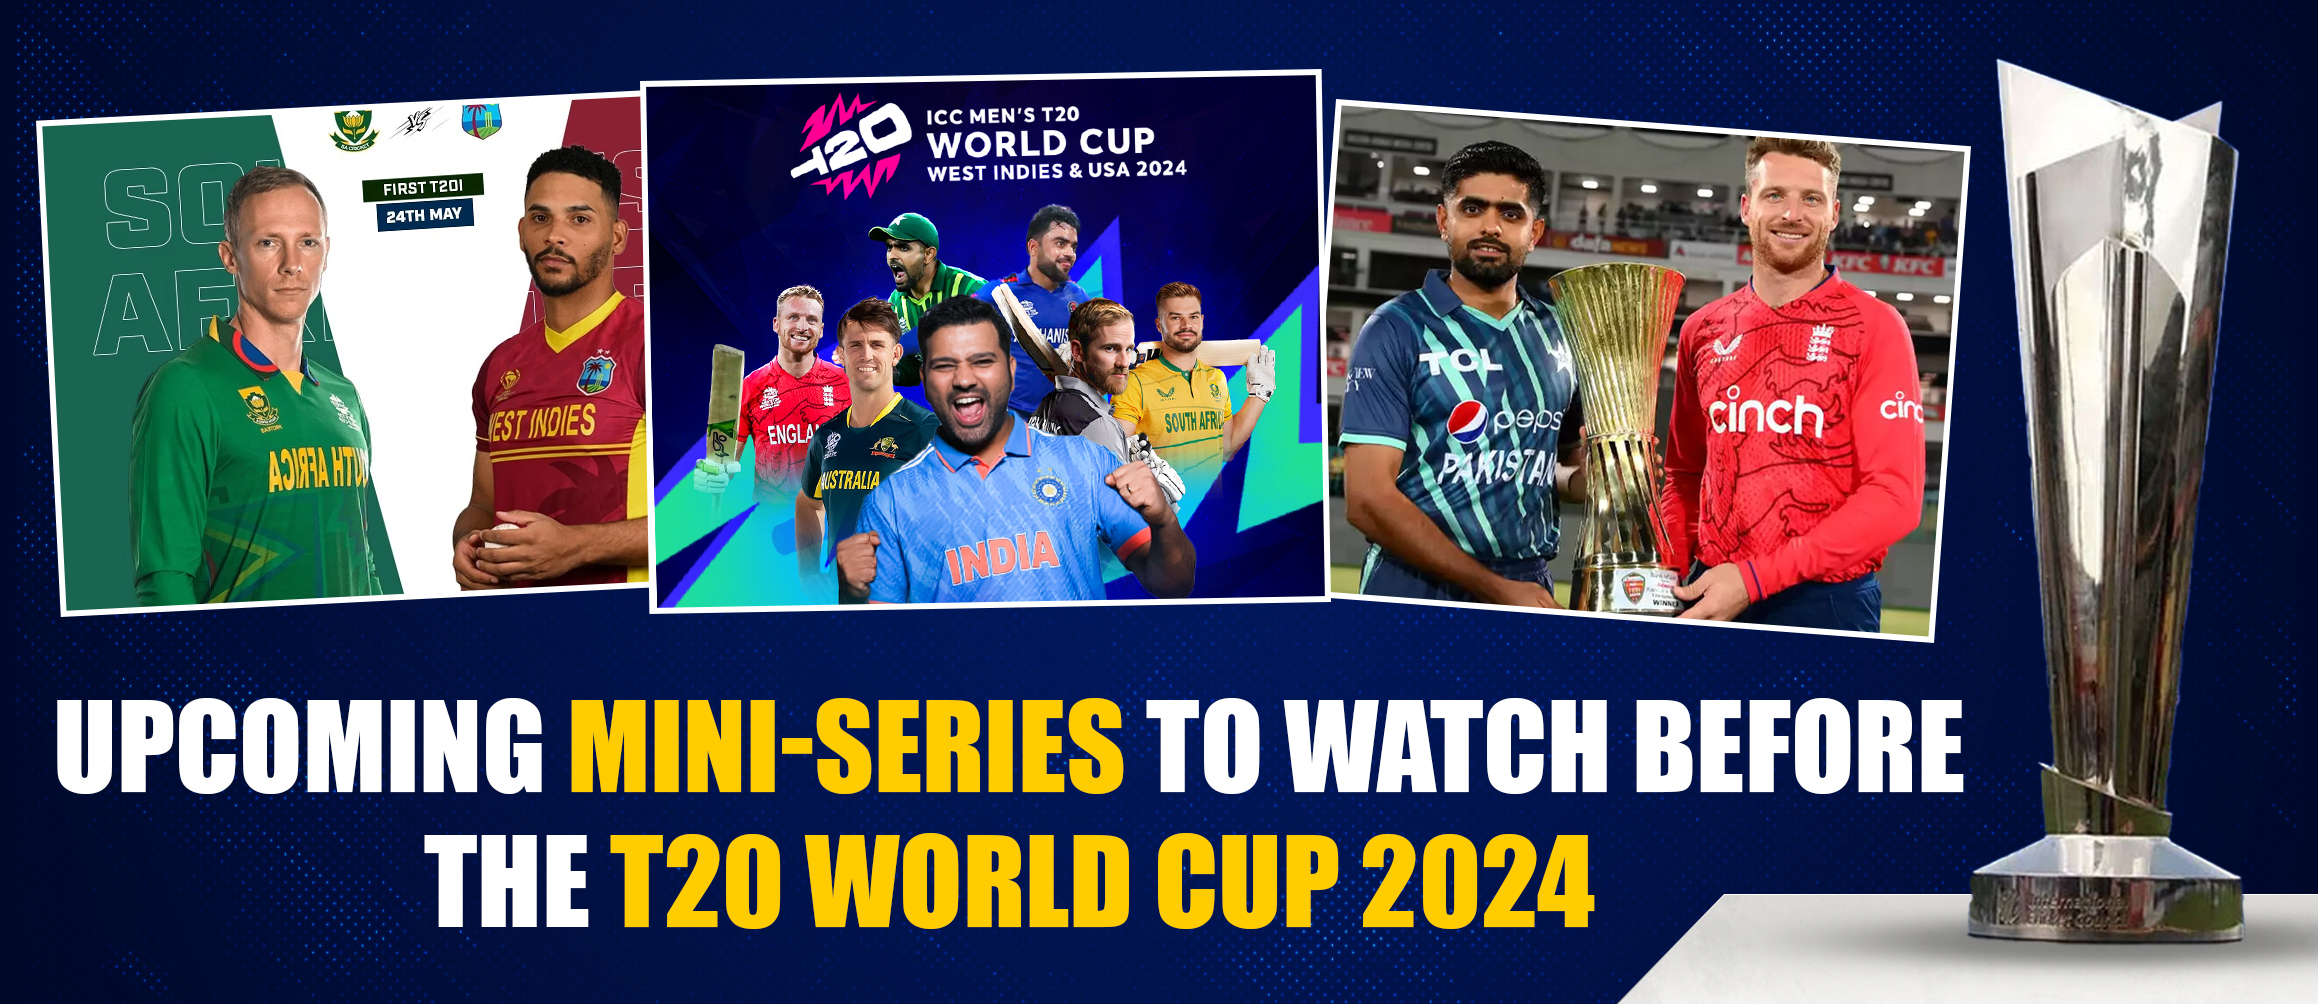 Upcoming Mini-Series to Watch Before the T20 World Cup 2024